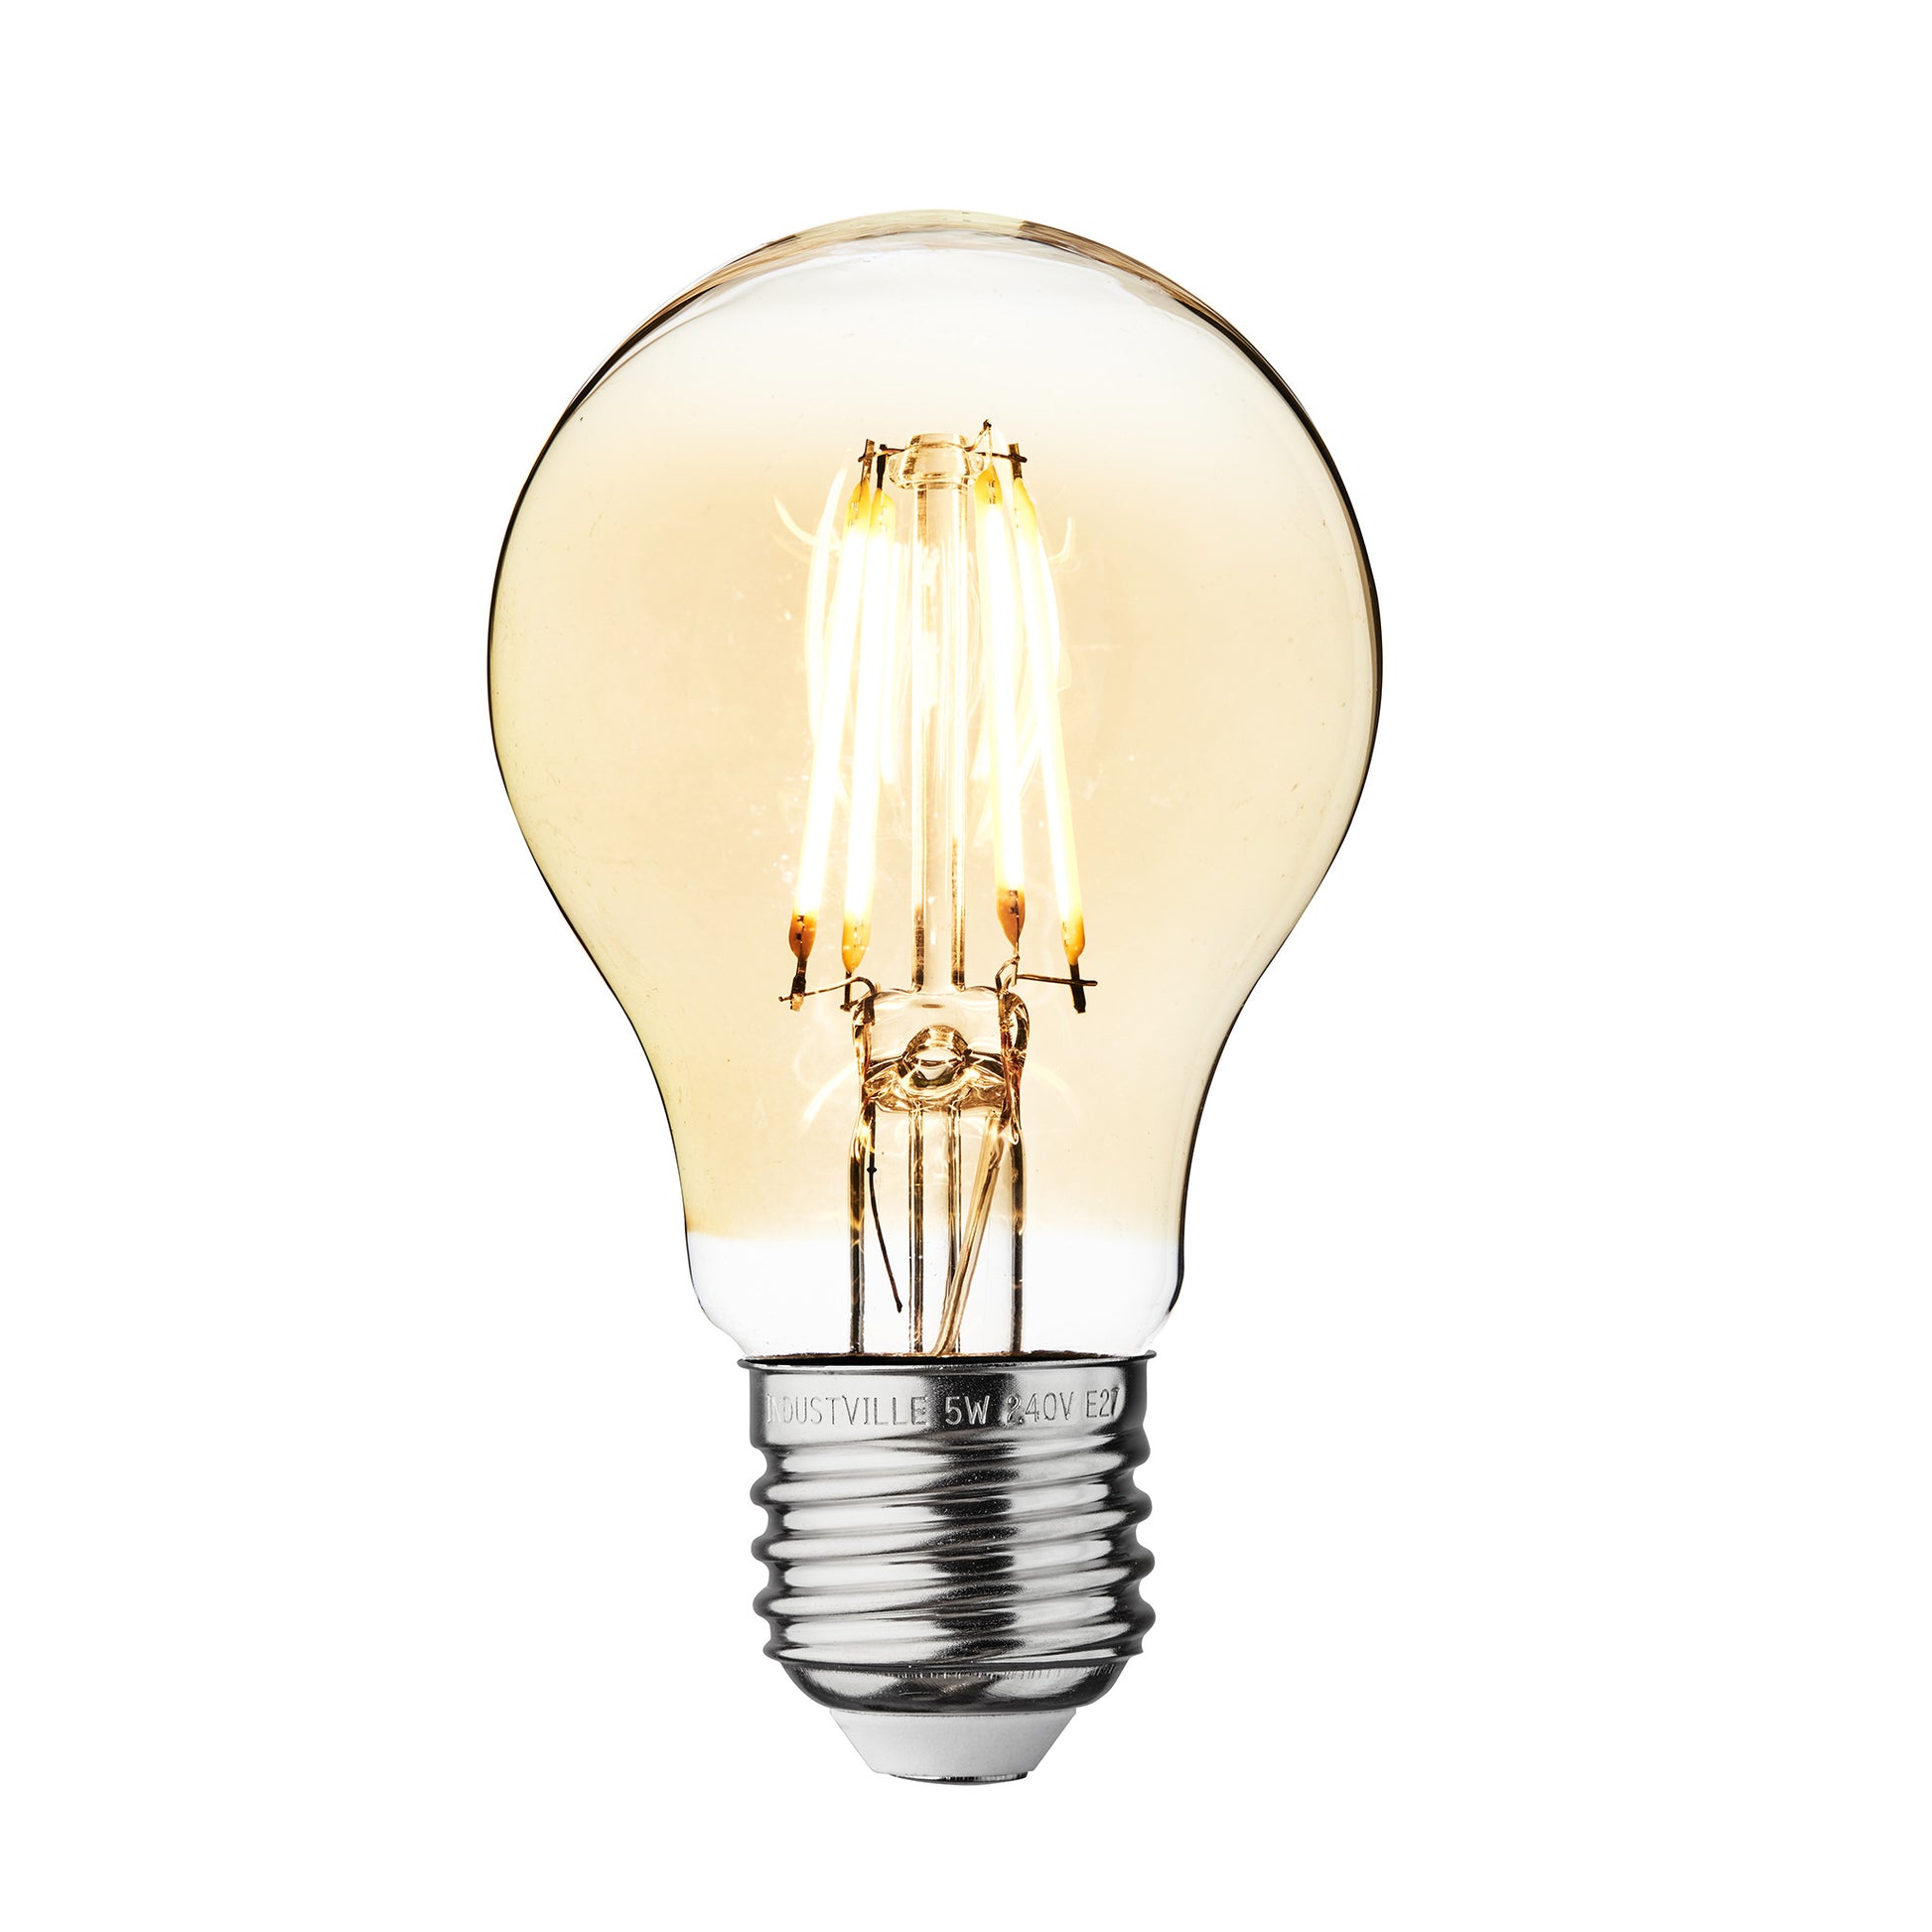  6W Dimmable Classic LED Filament Light Bulb - Shop for LED lights